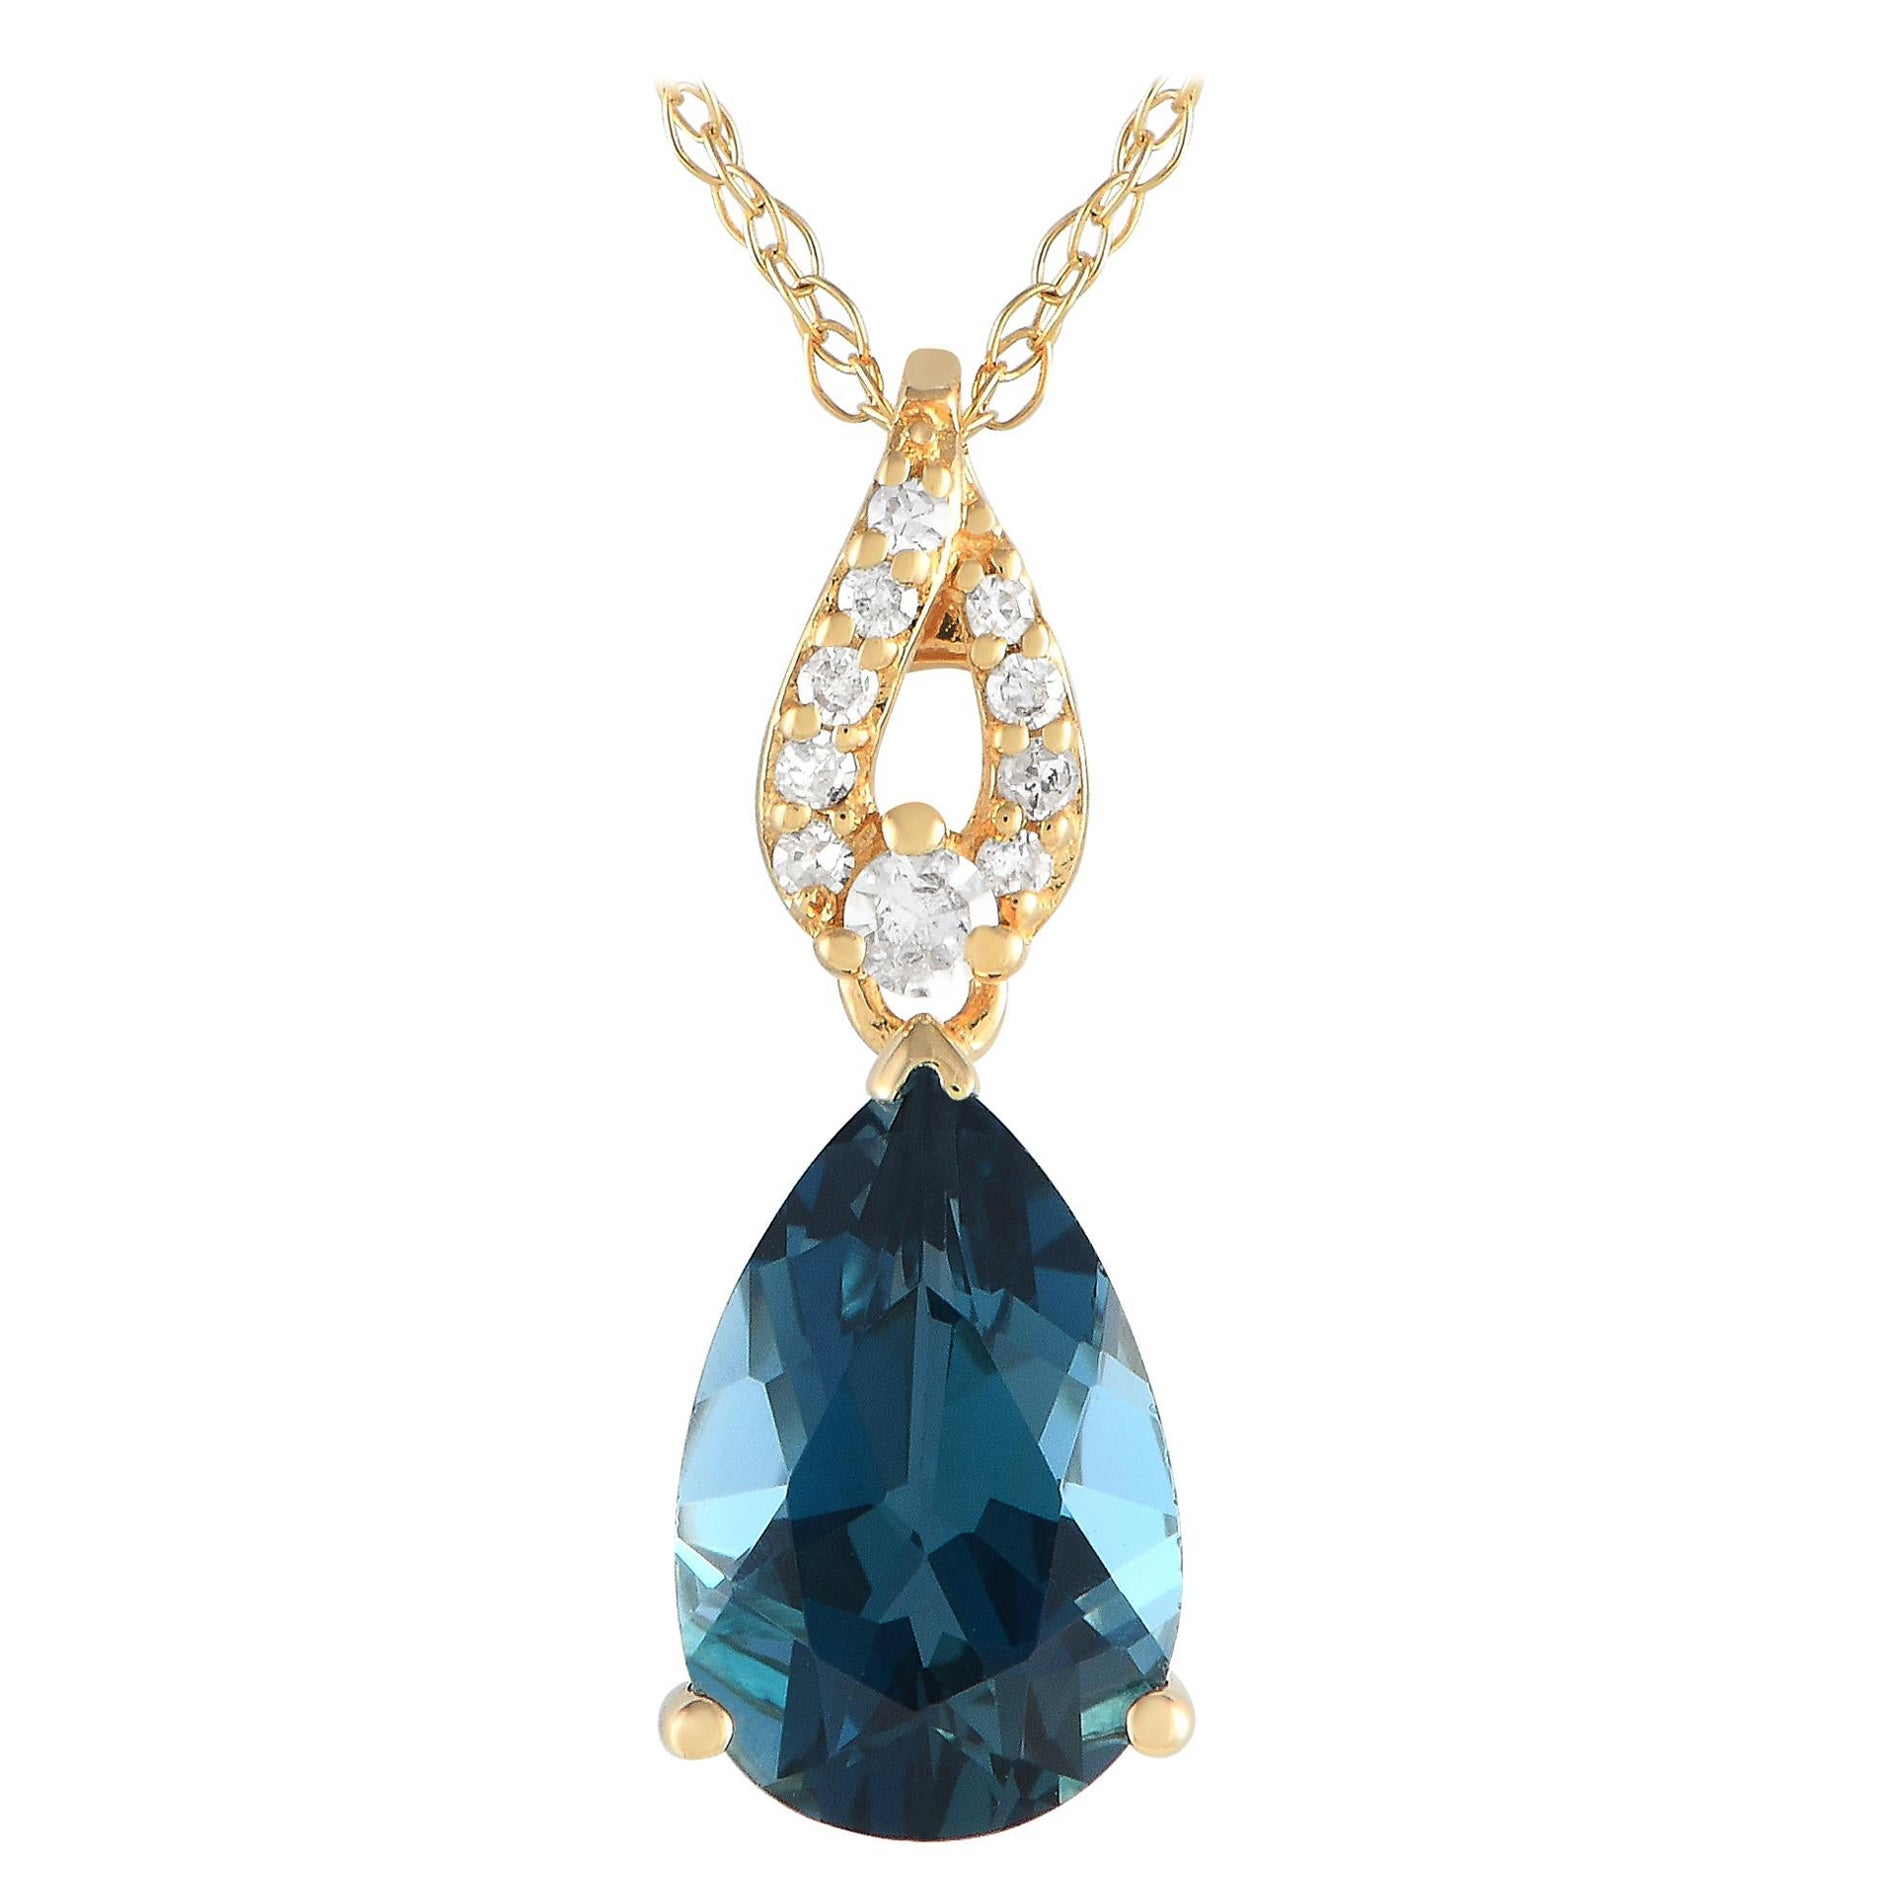 LB Exclusive 14K Yellow Gold 0.06ct Diamond and Blue Topaz Necklace PD4-16184YBT For Sale